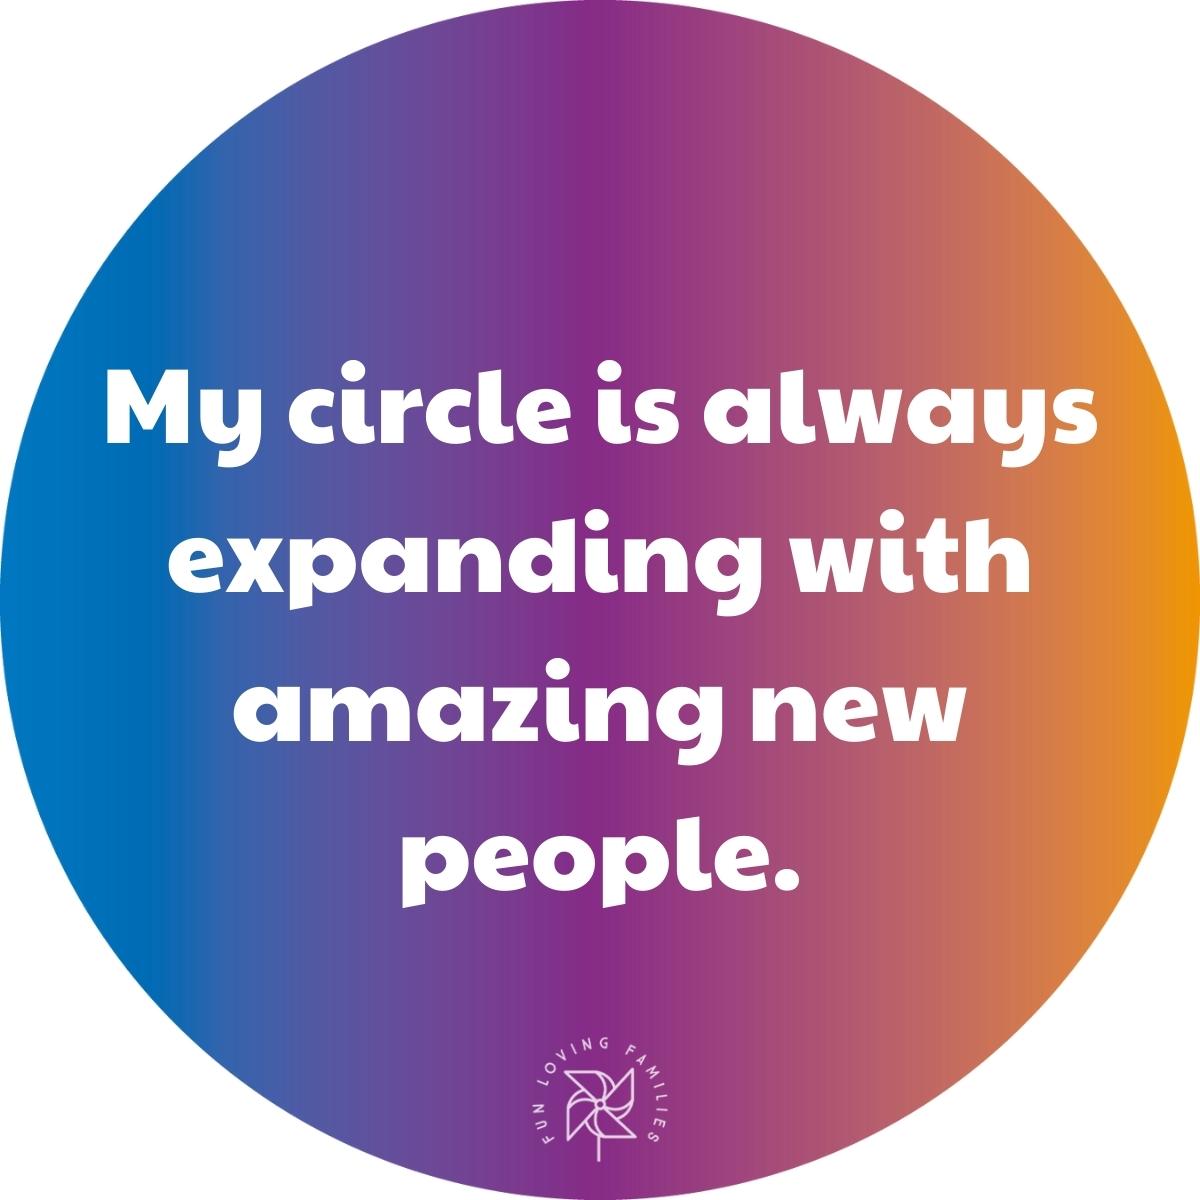 My circle is always expanding with amazing new people affirmation image